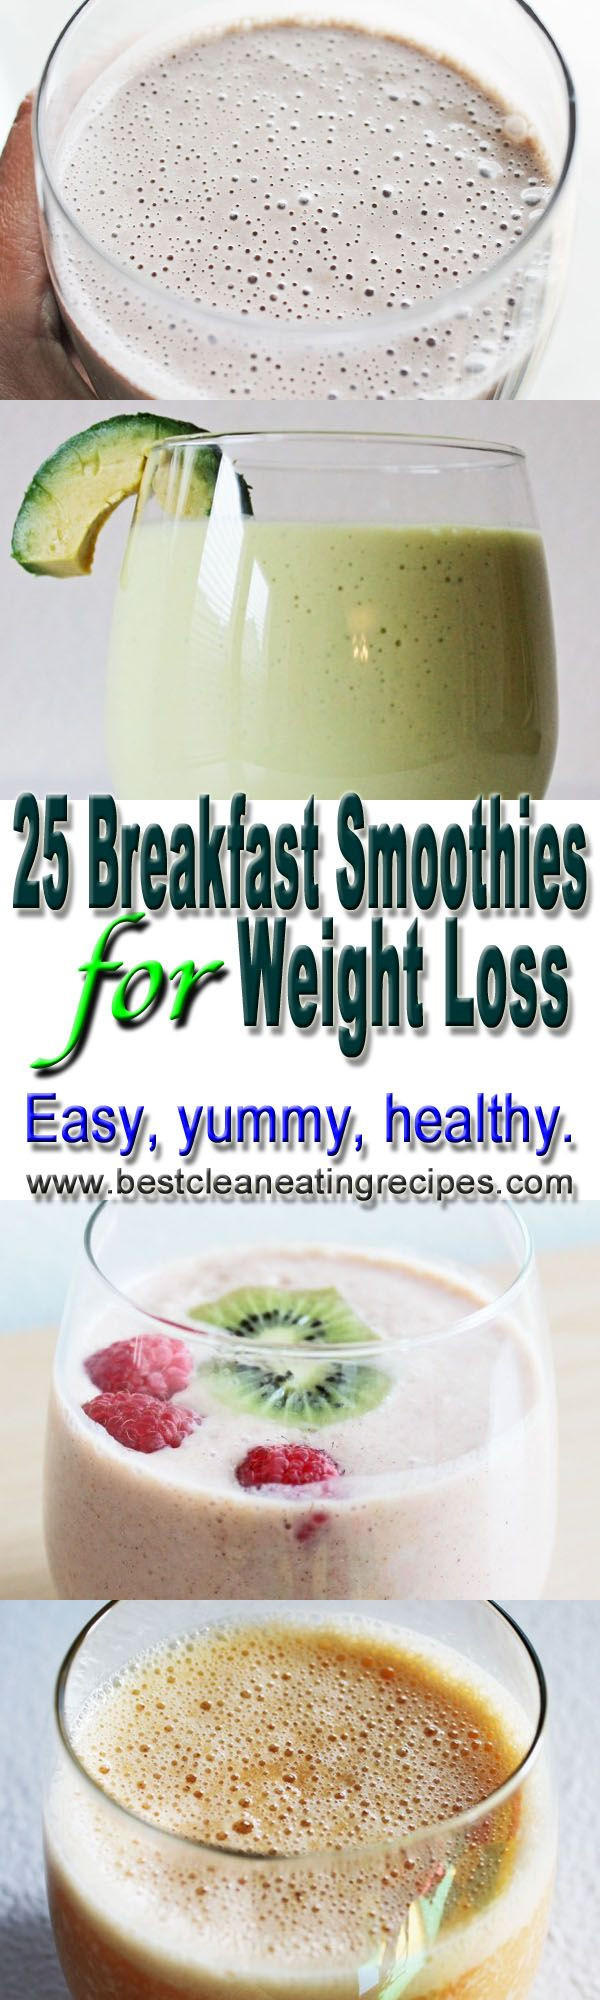 Healthy Breakfast Shake Recipes
 25 breakfast smoothies for weight loss by Best Clean